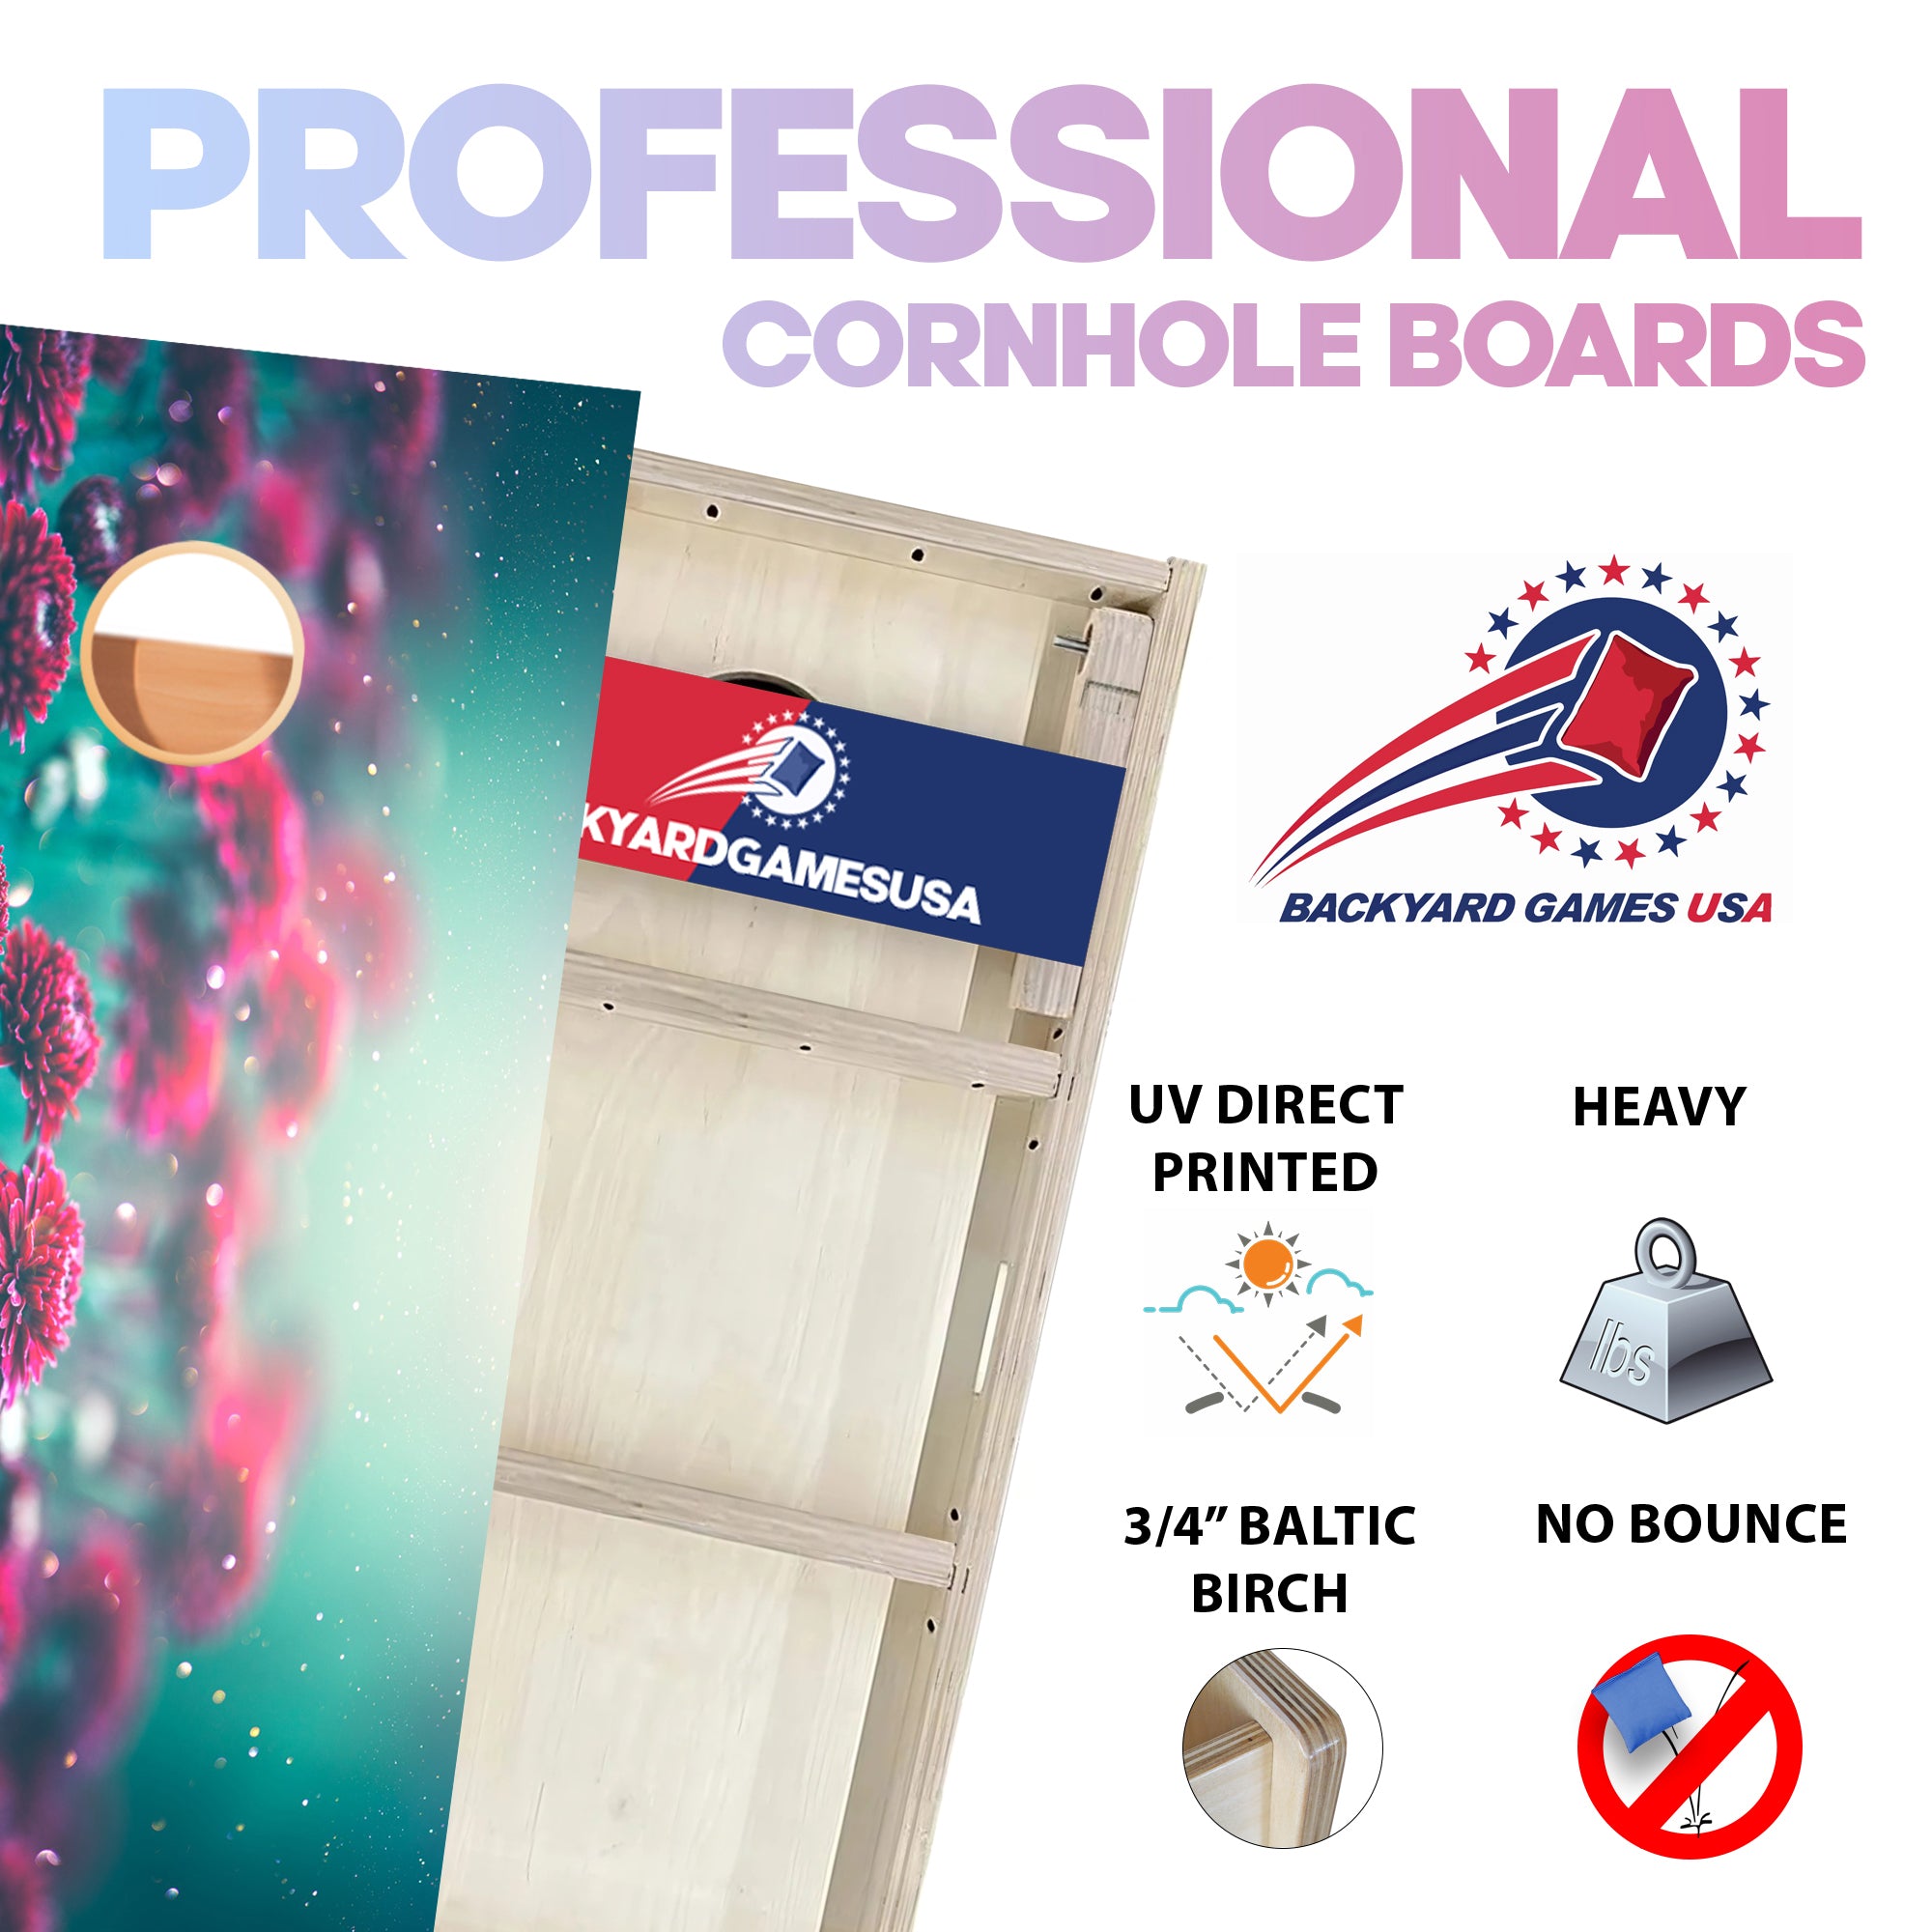 Red Flowers Professional Cornhole Boards